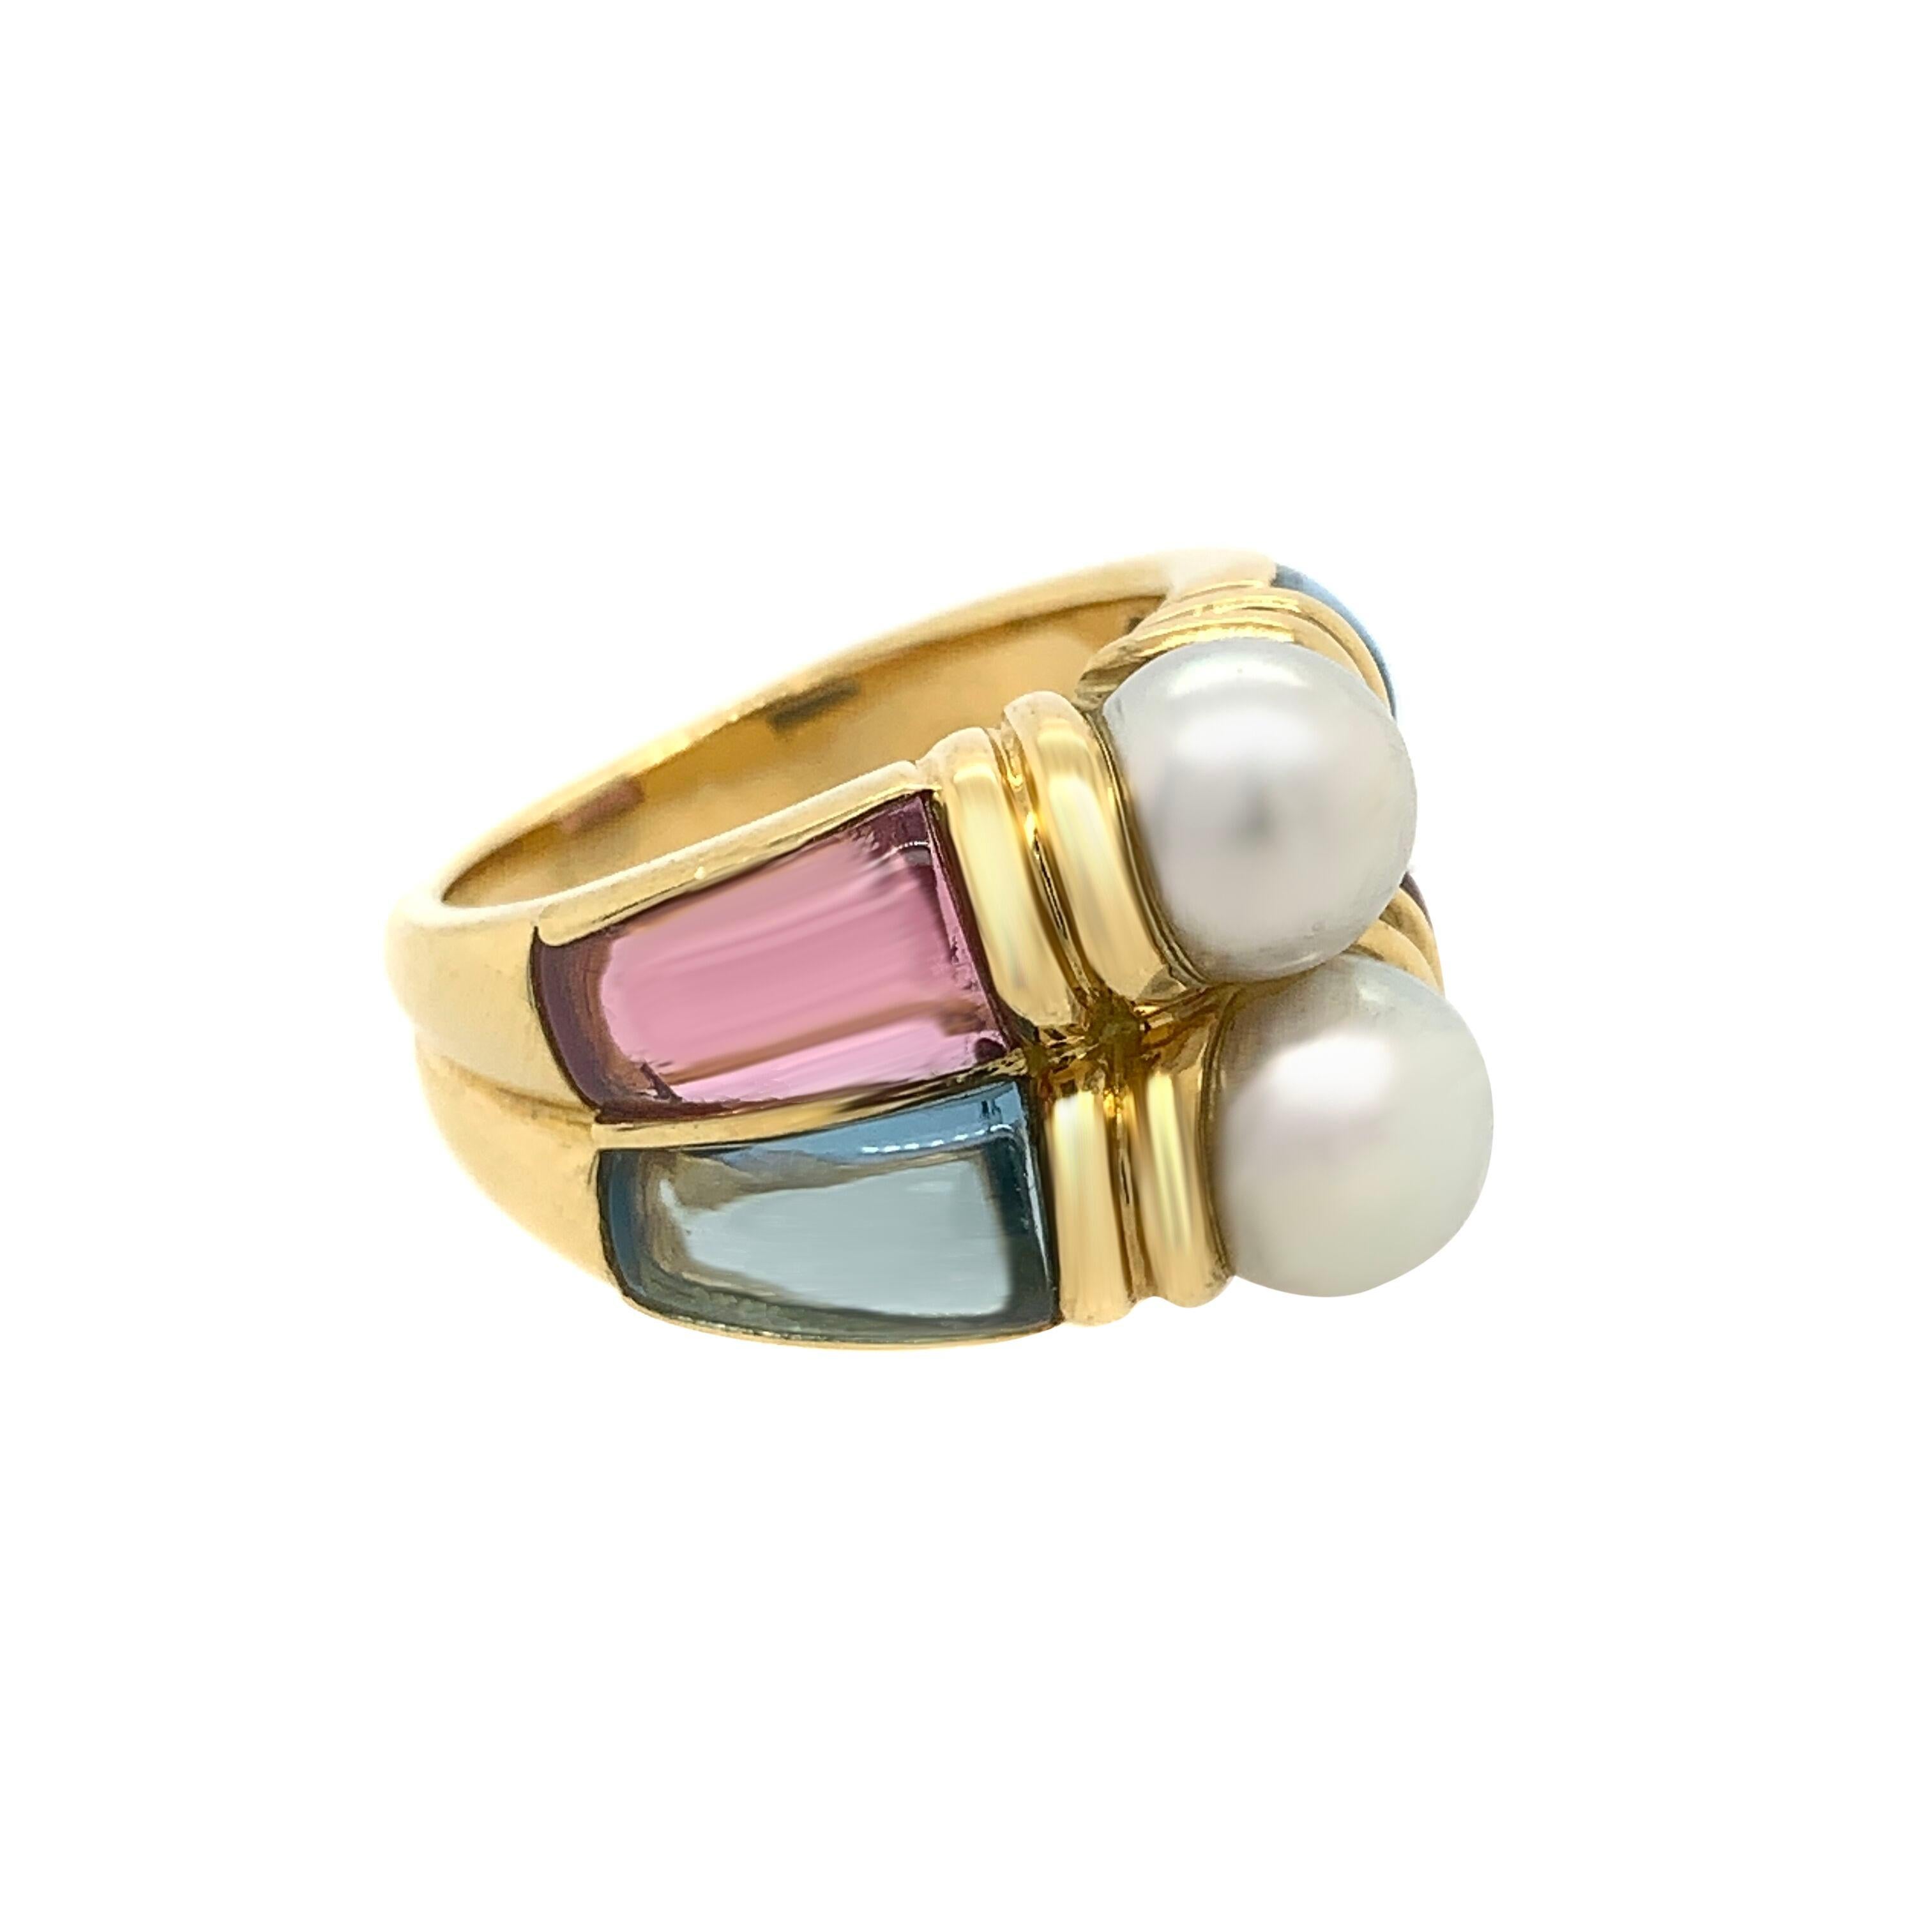 Brand: Bvlgari
Metal: 18k Yellow Gold
Ring Size: 5.5
Year of Manufacture: Circa 1970s
Condition: Excellent
Gemstone: Tourmaline, Aquamarine , 2 Cultured Pearls
Total Item Weight: 14 g